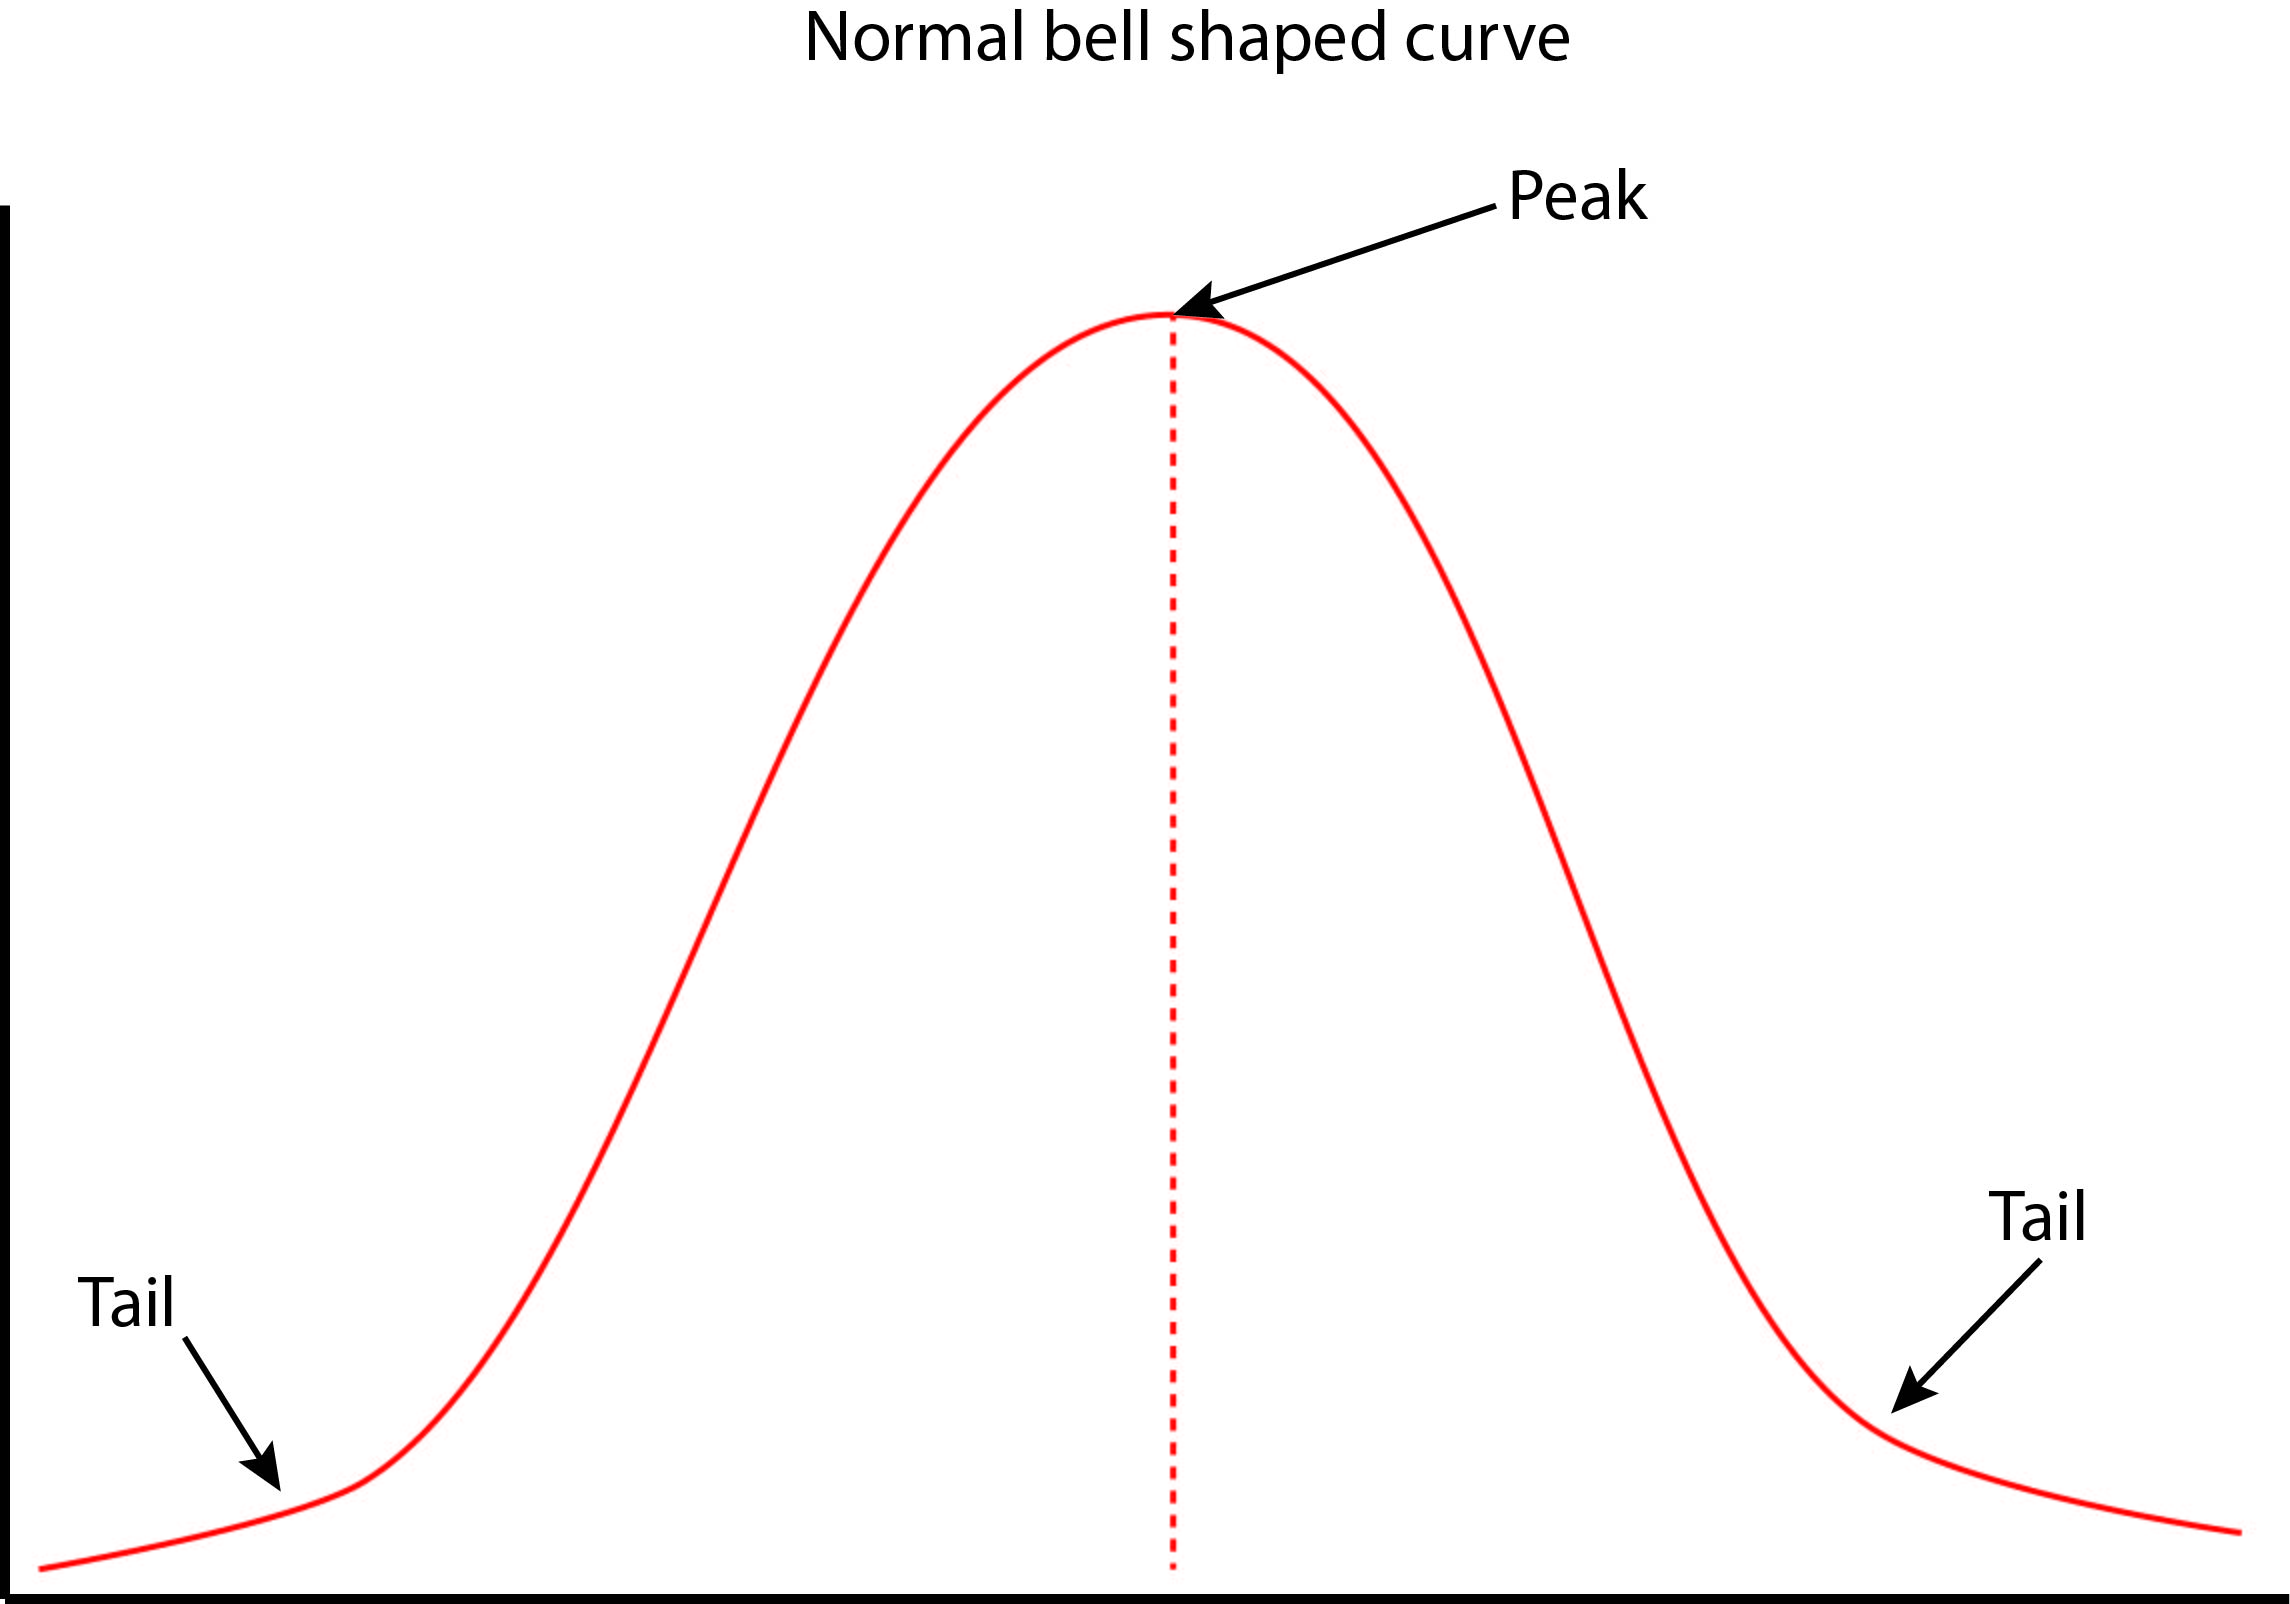 This is an example of an evenly distributed bell curve with the mode going through the centre